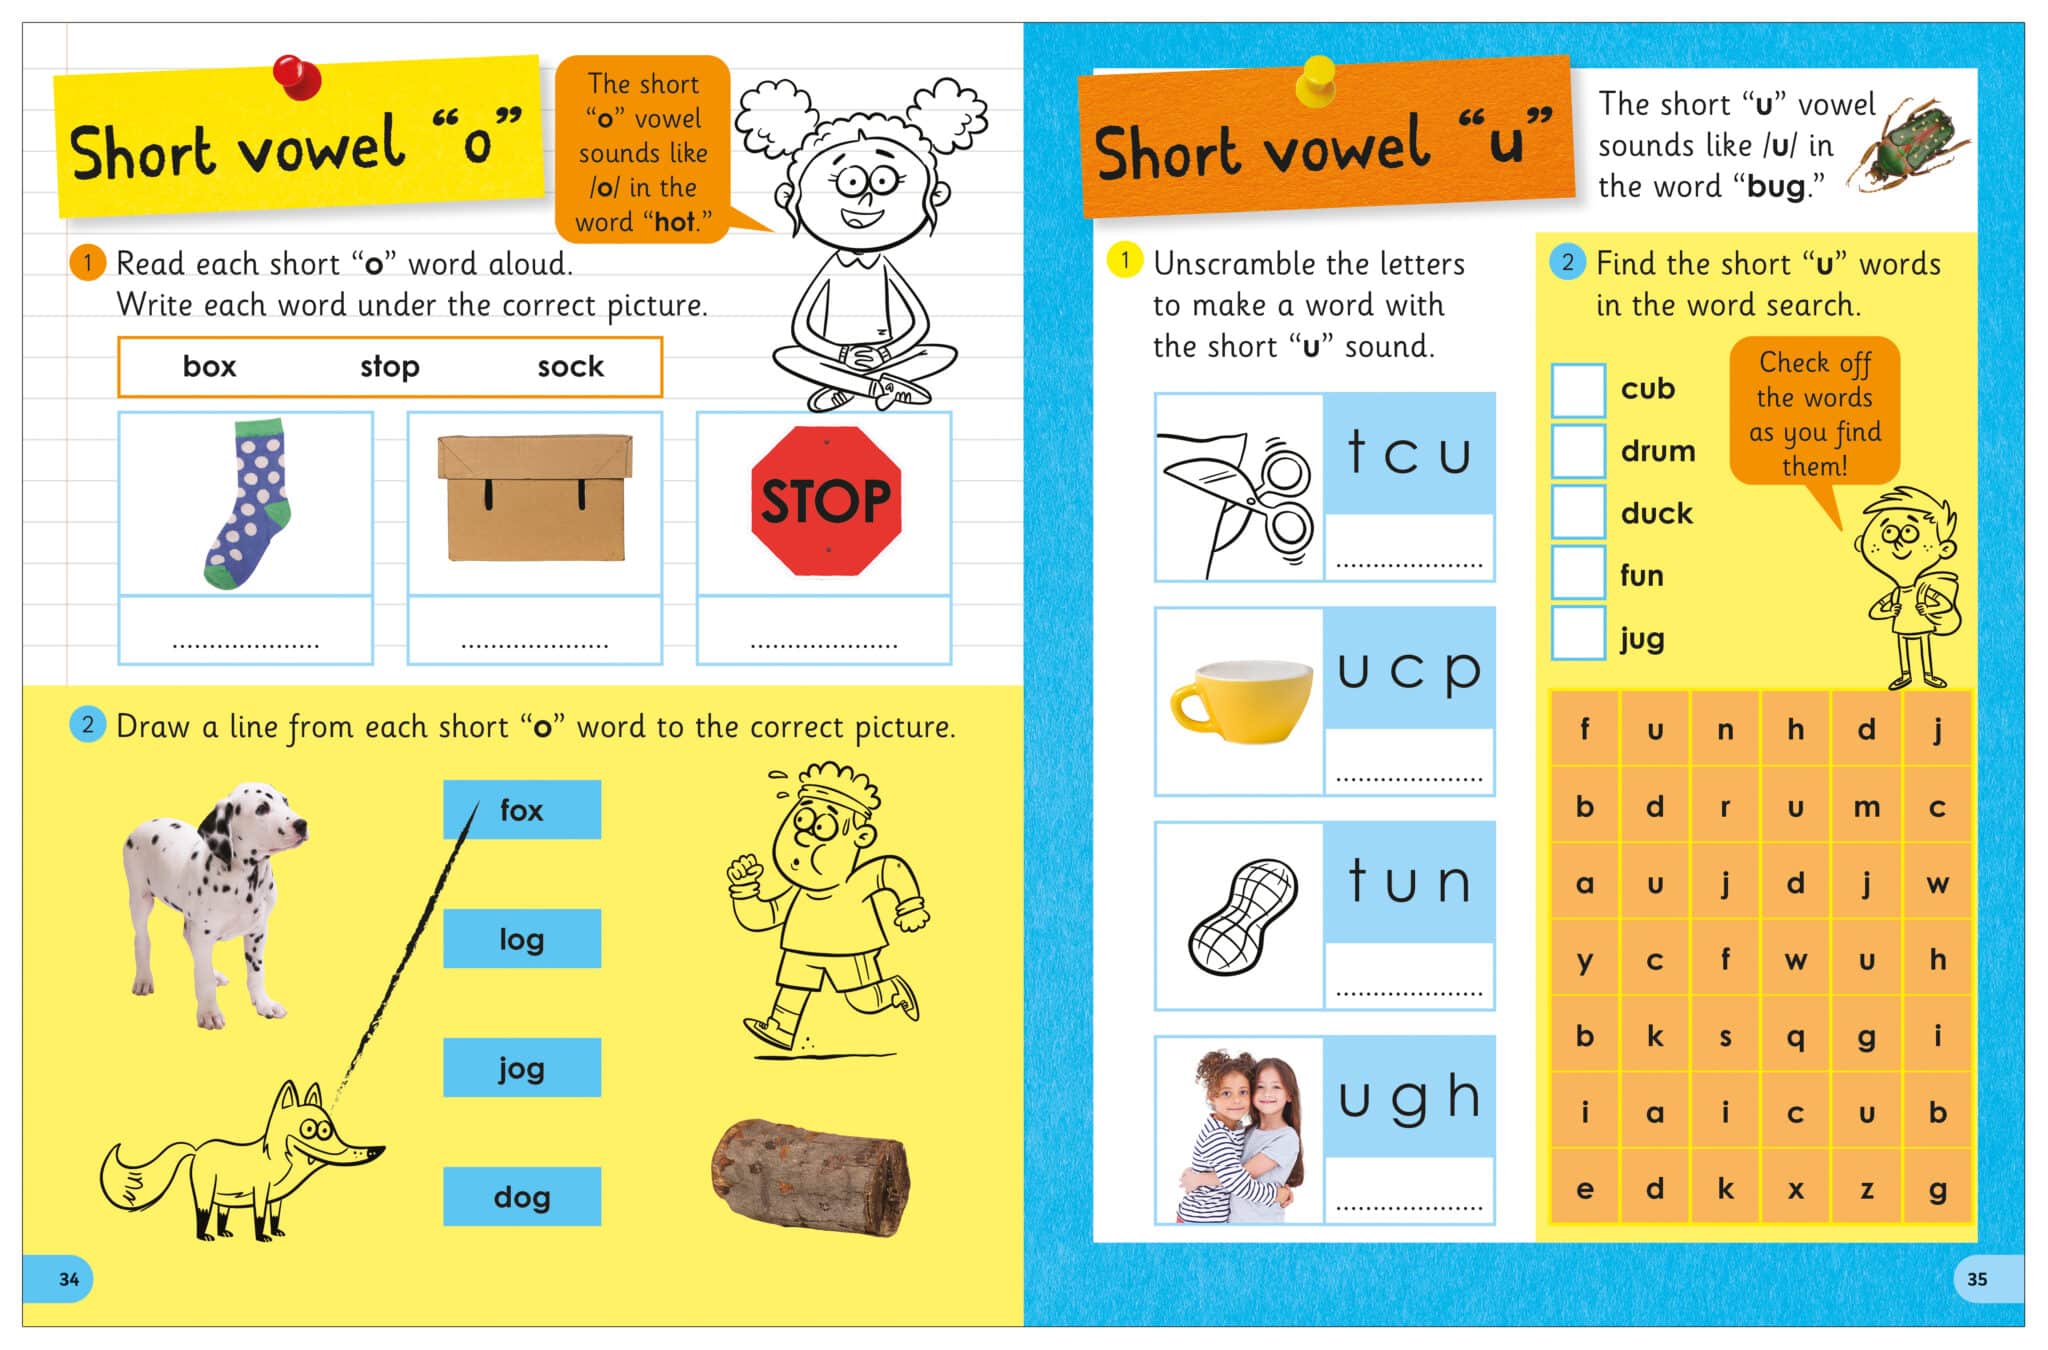 Pages from a children's educational workbook featuring exercises on short vowel